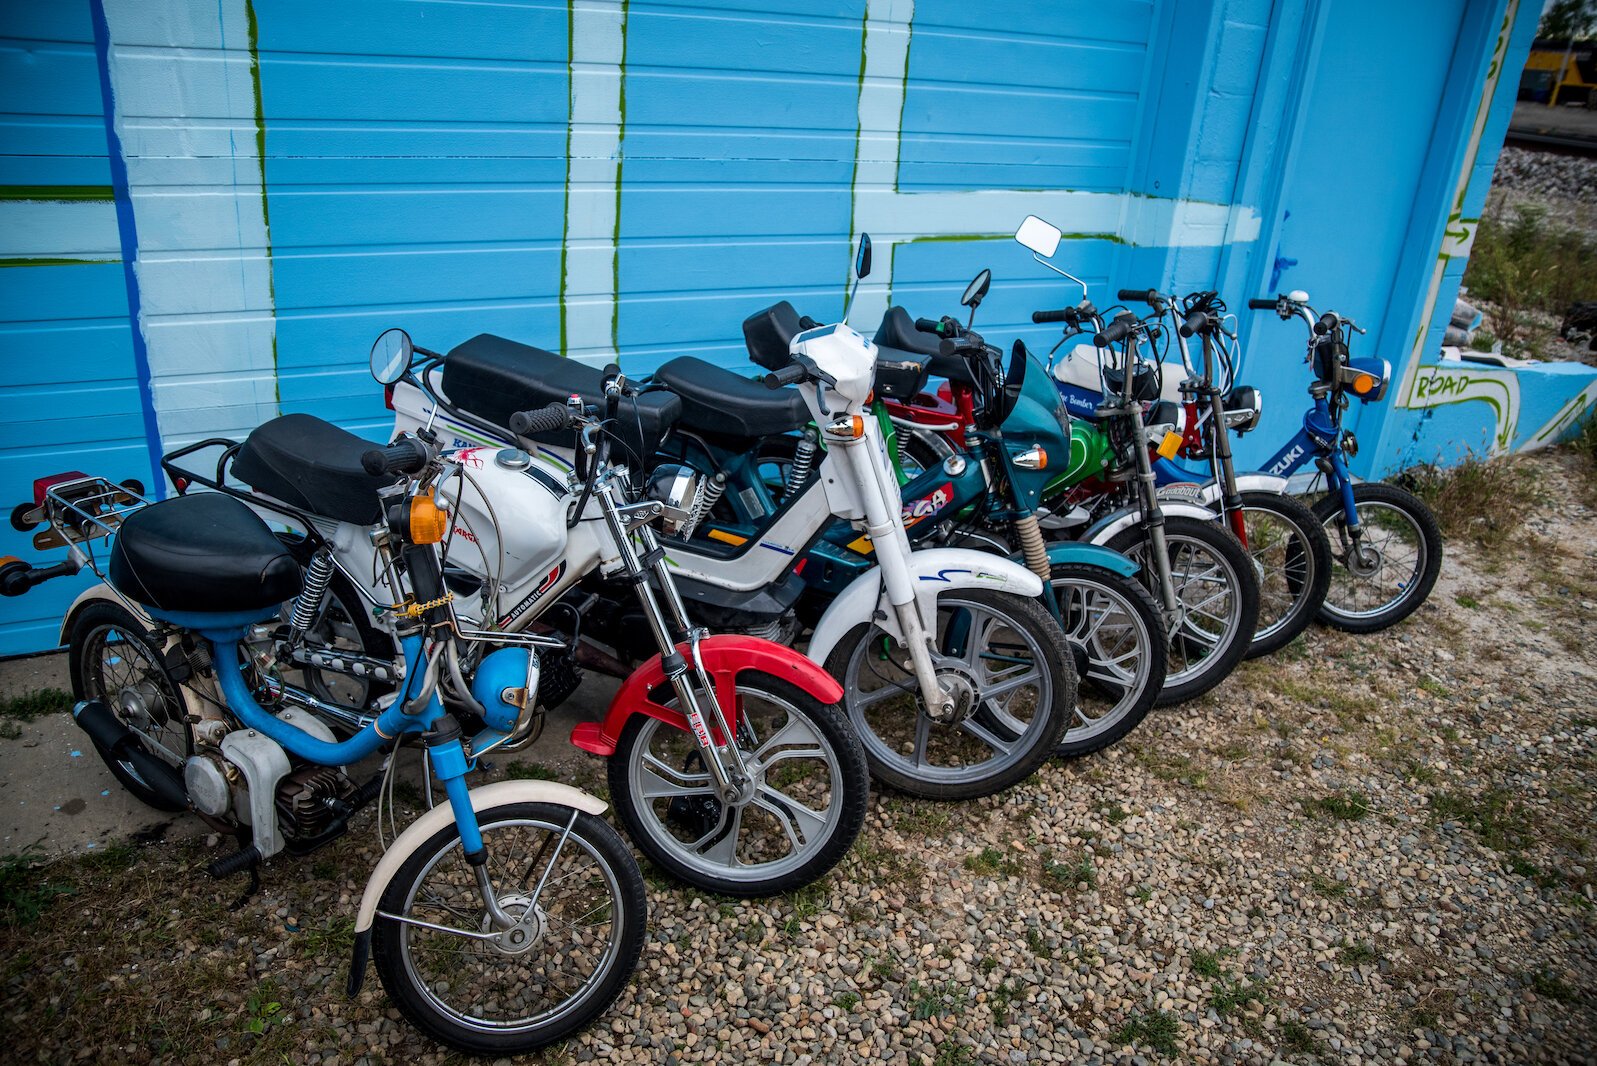 Some of the mopeds from the Quarterkick business run by Chad Burke.